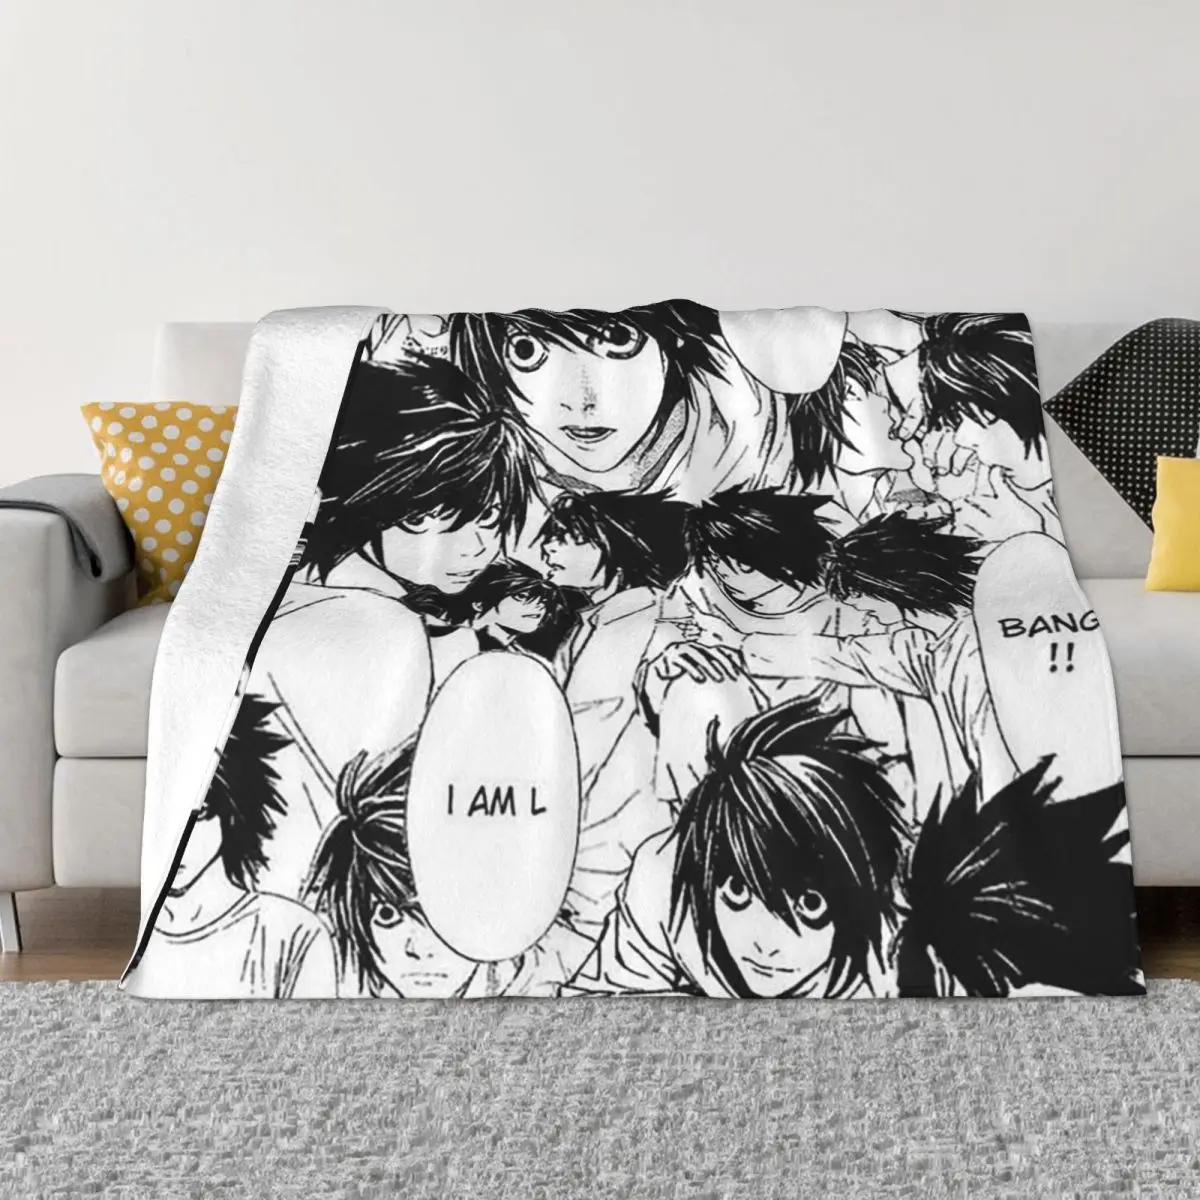 

Death Note Plaid Anime Blankets Flannel Decoration Lawliet Collage Cartoon Soft Throw Blanket for Bed Couch Bedding Throws